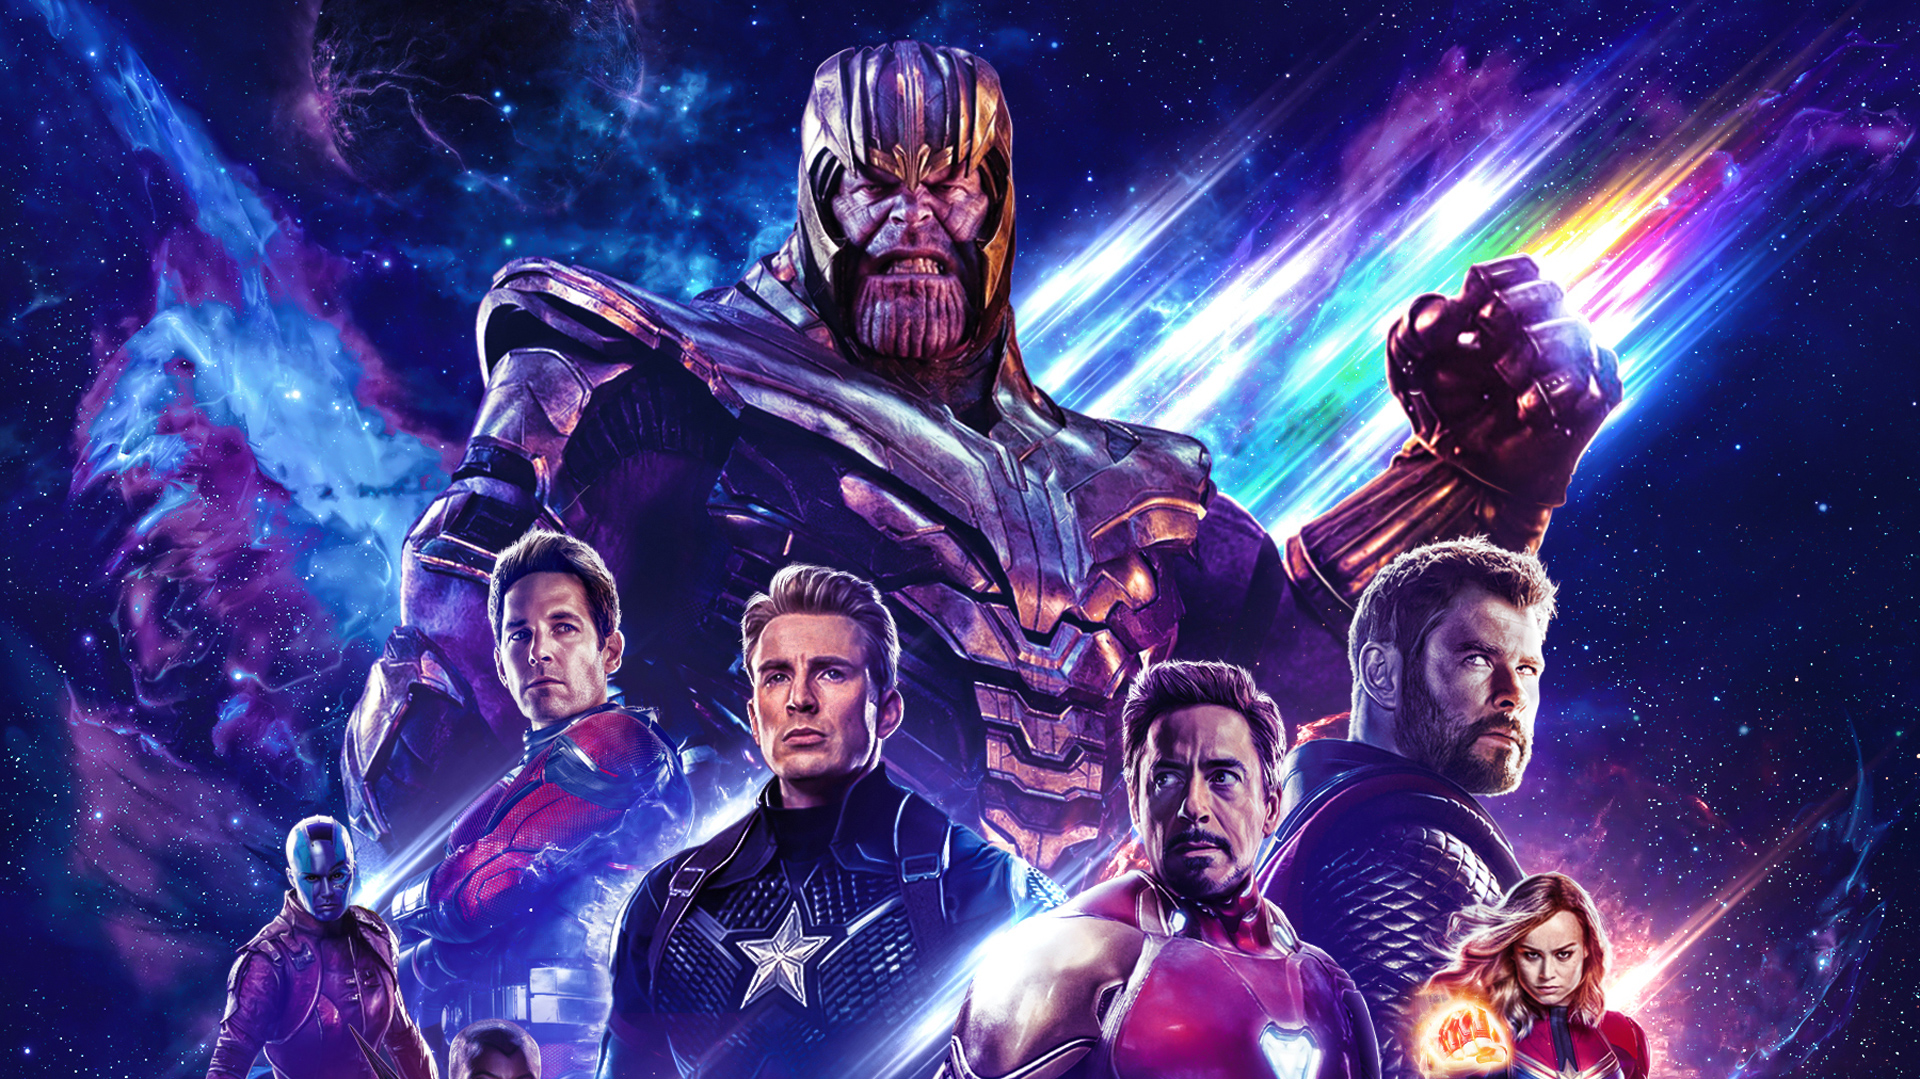 Poster Avengers Endgame HD Superheroes 4k Wallpapers Images Backgrounds Photos And Pictures